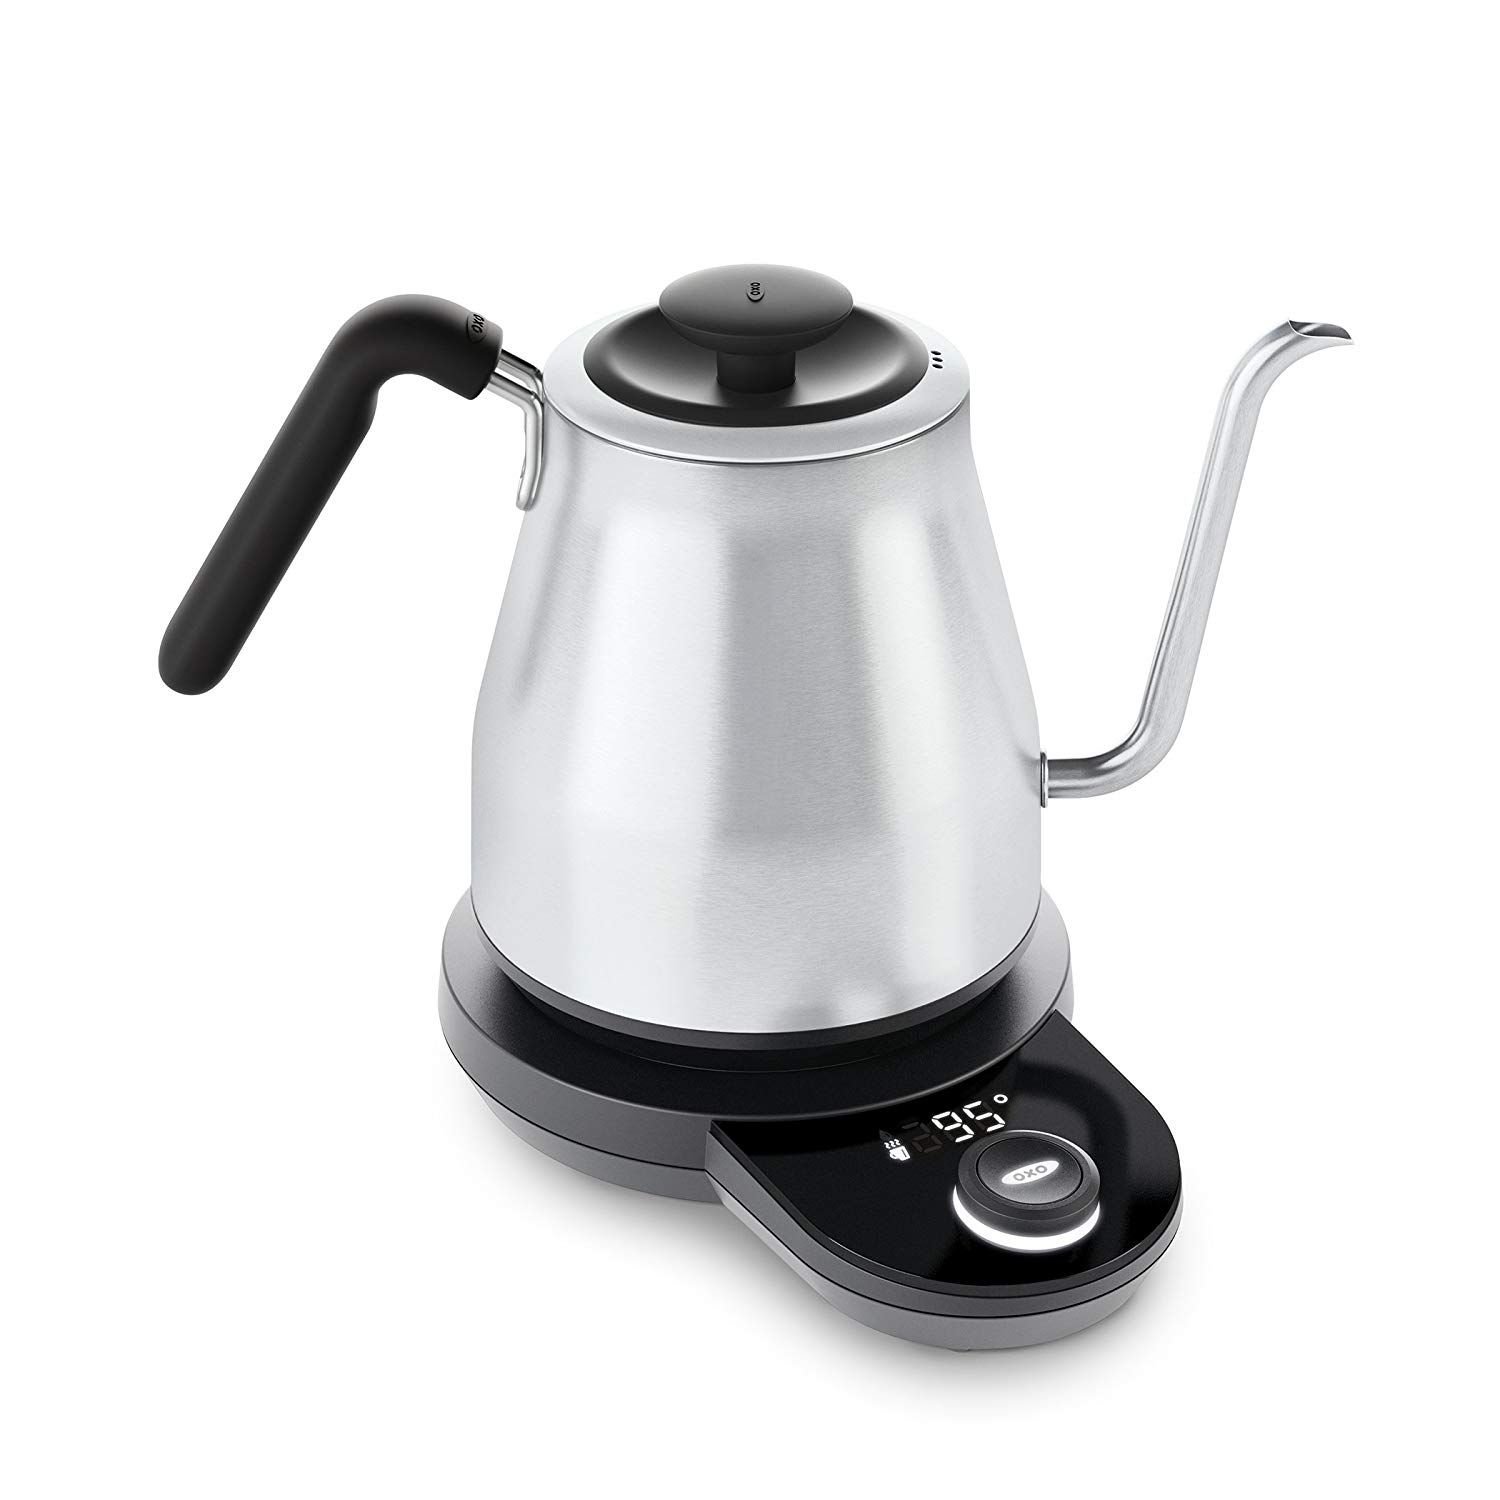 https://cdn.everythingkitchens.com/media/catalog/product/cache/70d878061ea71e5b62358b2b67547186/8/7/8717100_oxo_on_adjustable-temperature_pour-over_kettle.jpg